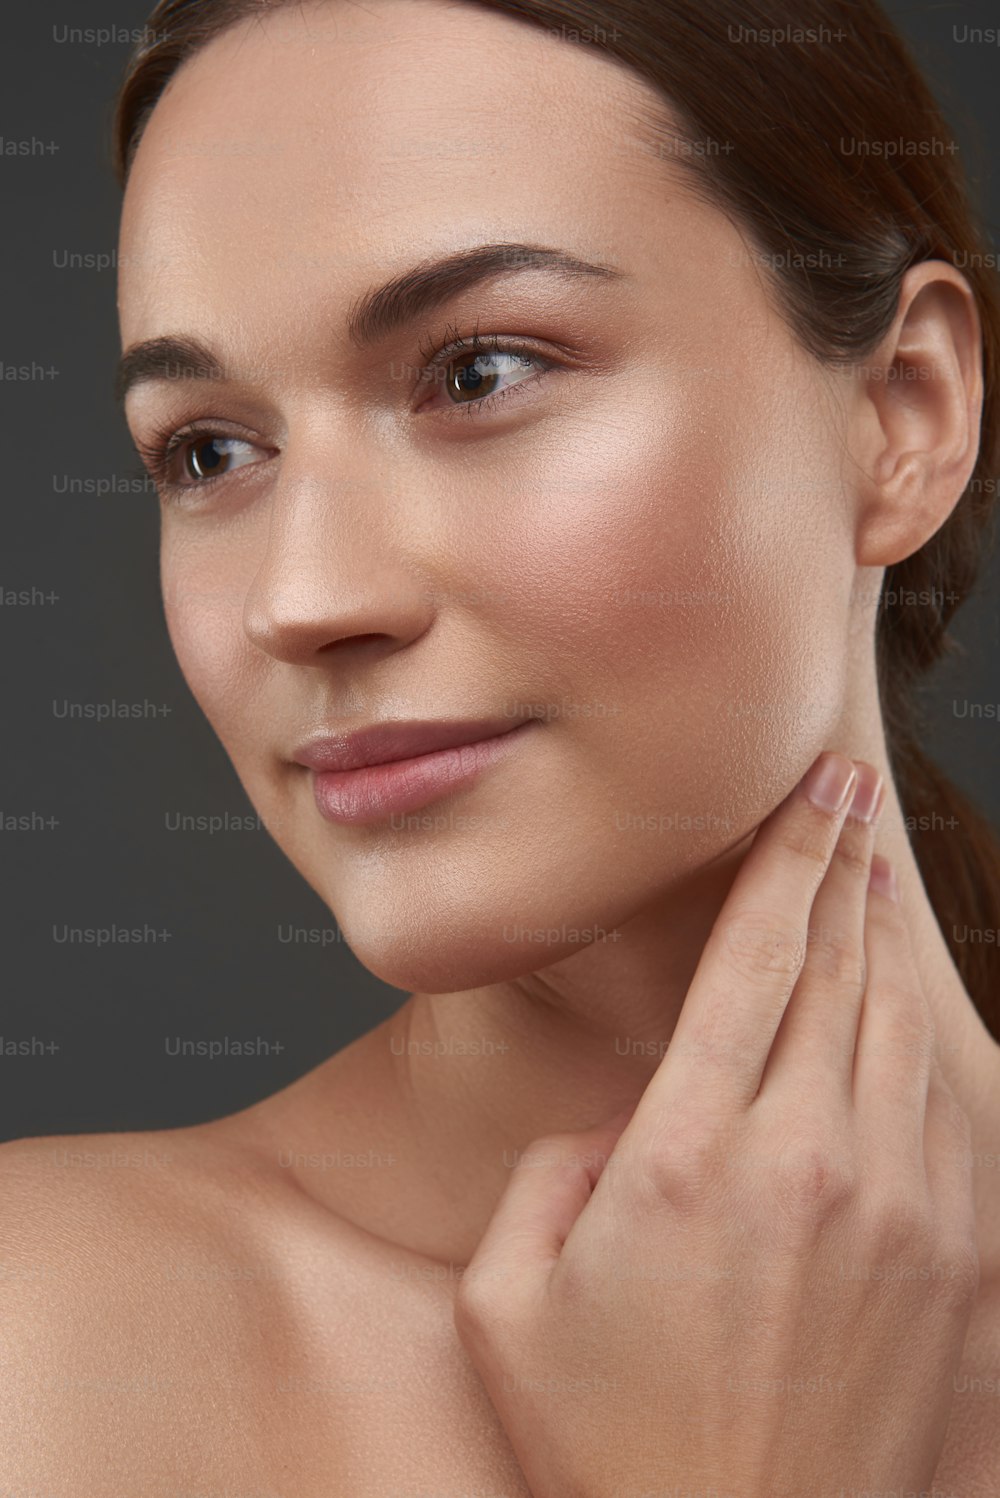 Close up portrait of charming lady with natural makeup looking away and smiling. Isolated on gray background